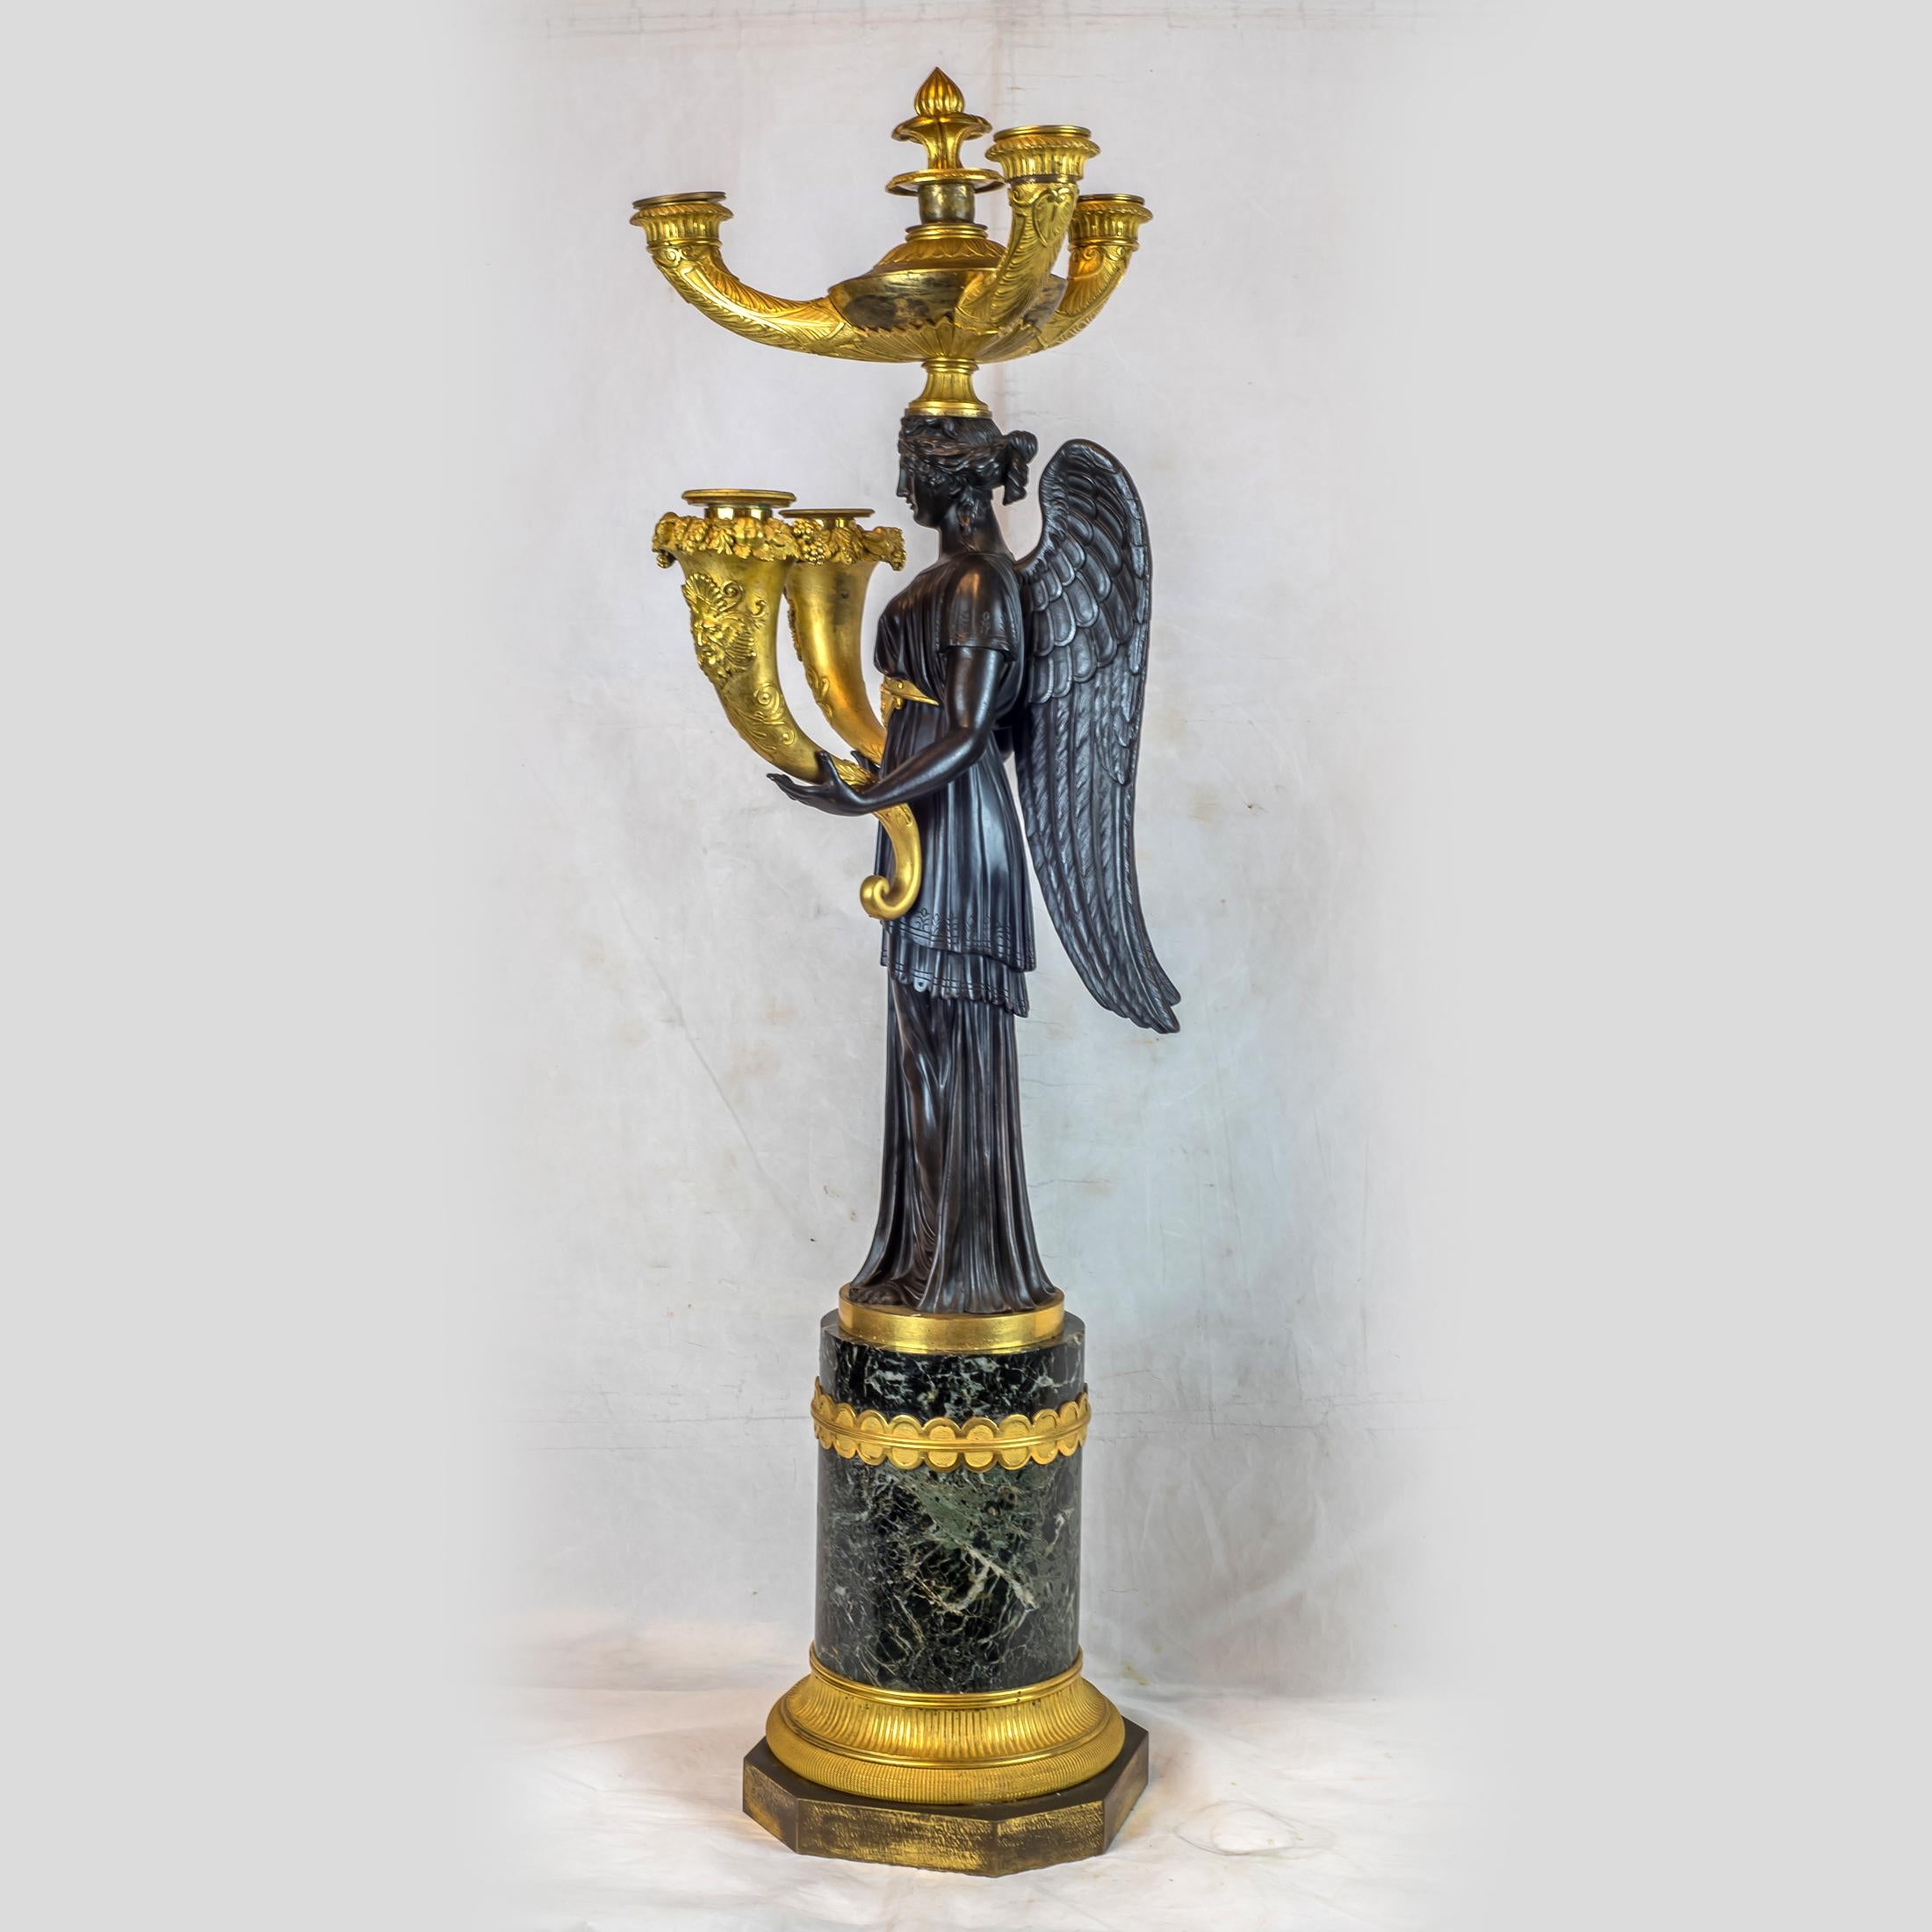 An Elegant pair of Empire Patinated and gilt bronze five-light candelabras. 
Each candelabra formed as a winged maiden holding a cornucopia torch in each hand, surmounted on vert de mer marble bases. 

Date: circa 1810
Origin: French
Dimension: